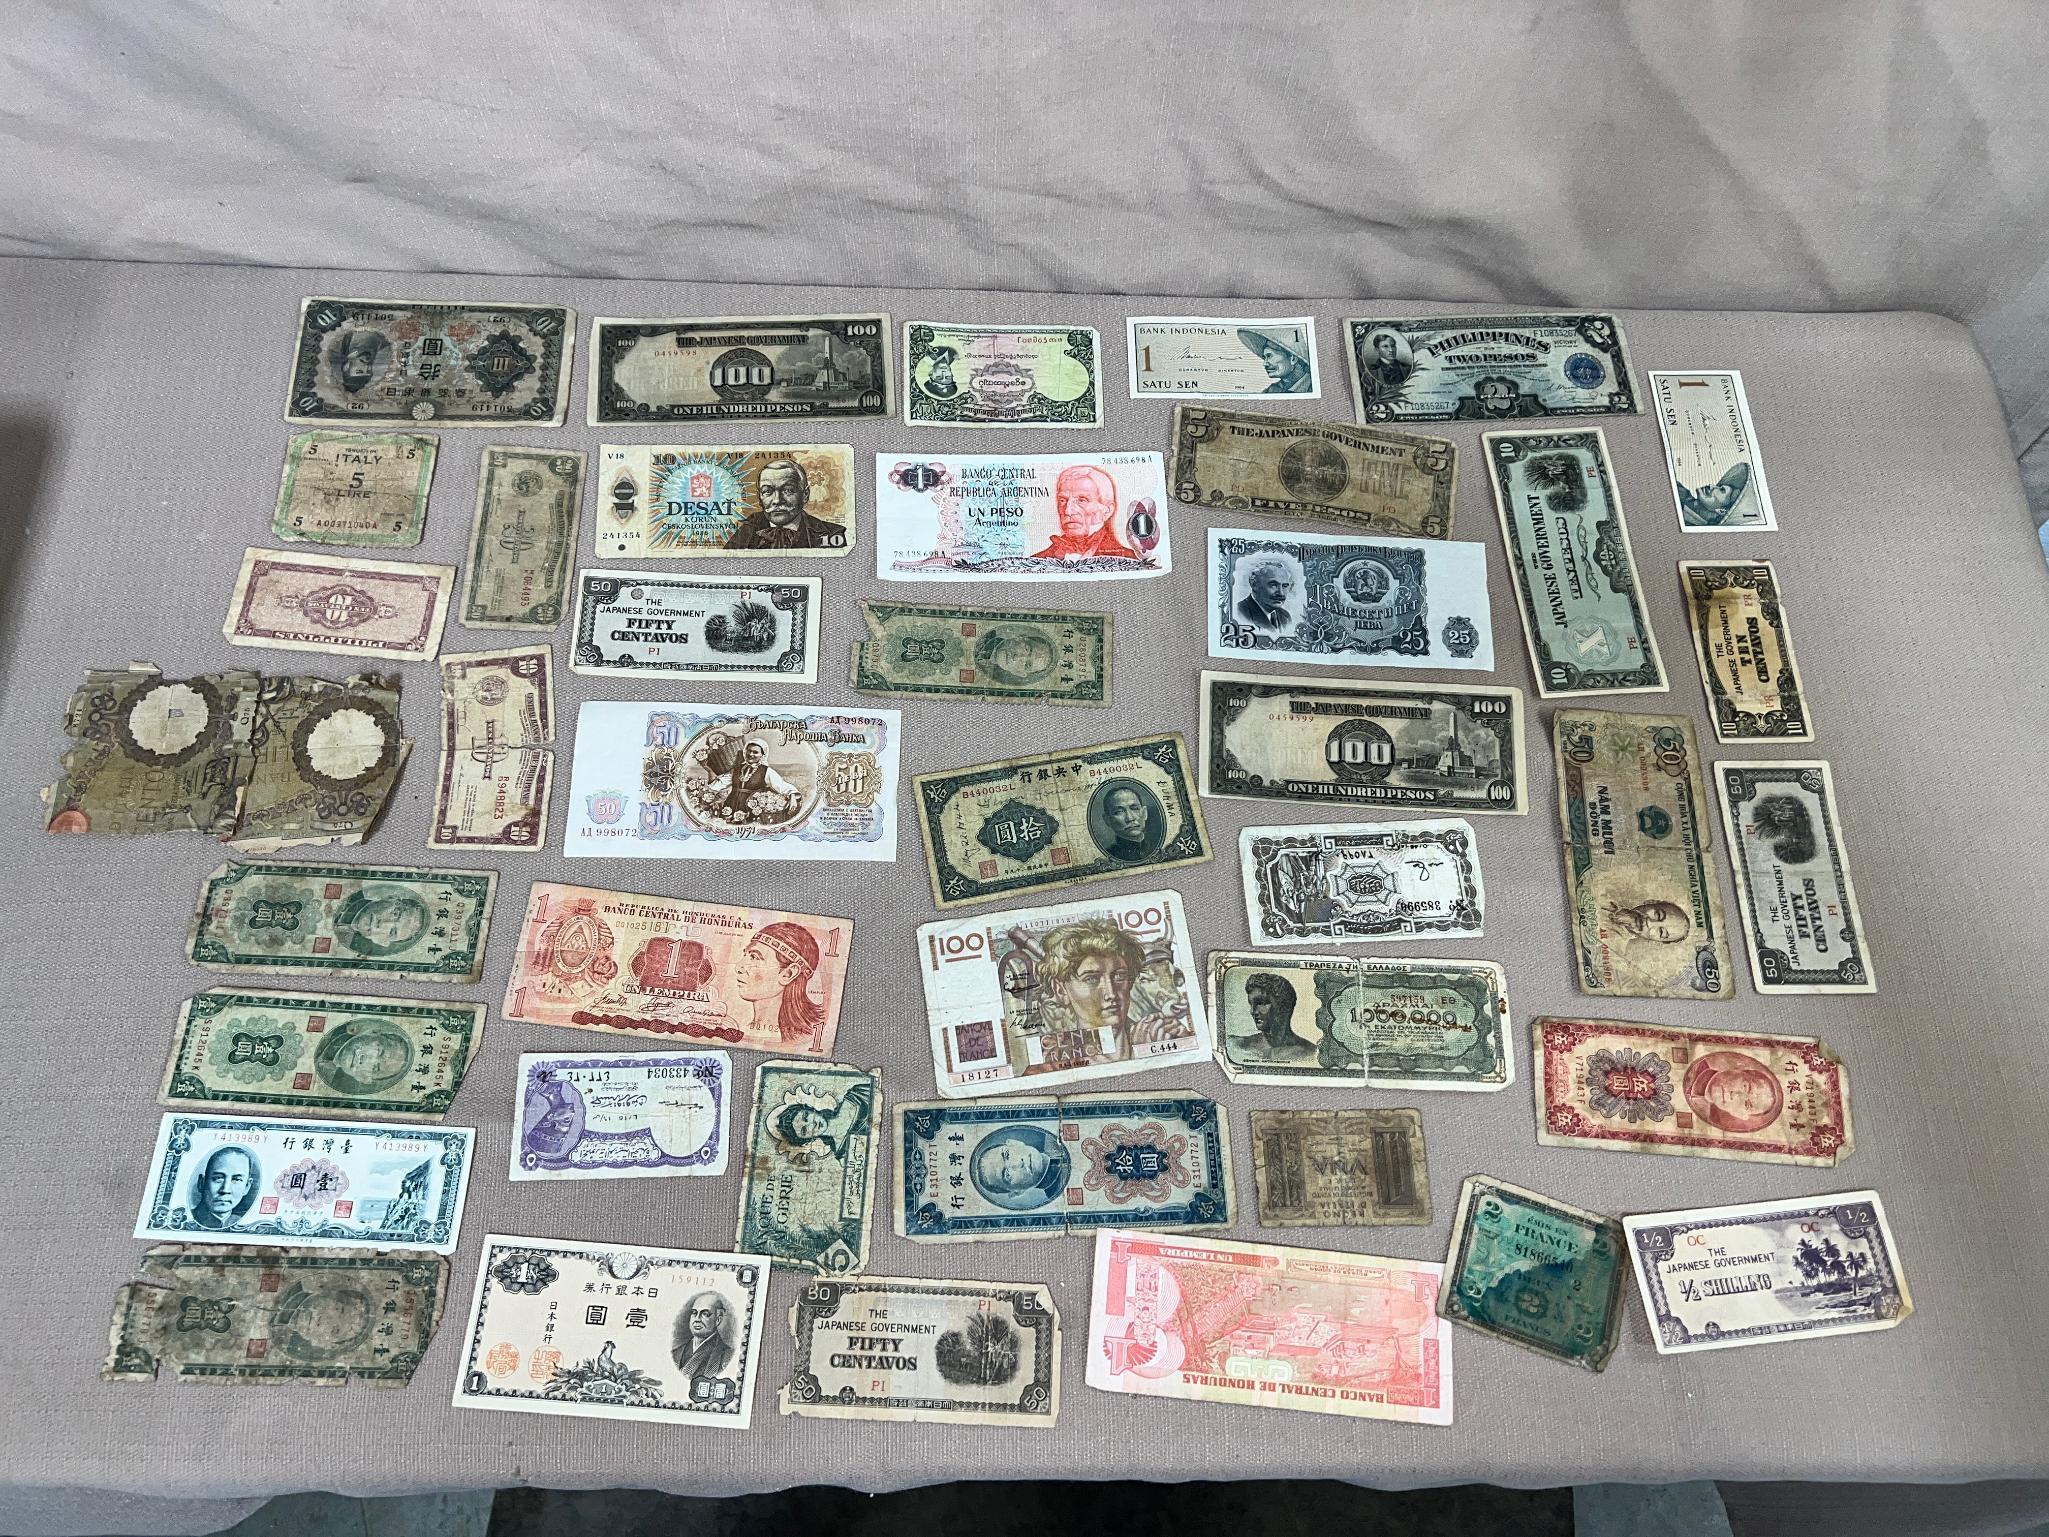 200+ Pieces of Foreign Banknotes, see all pics, loads of great notes here